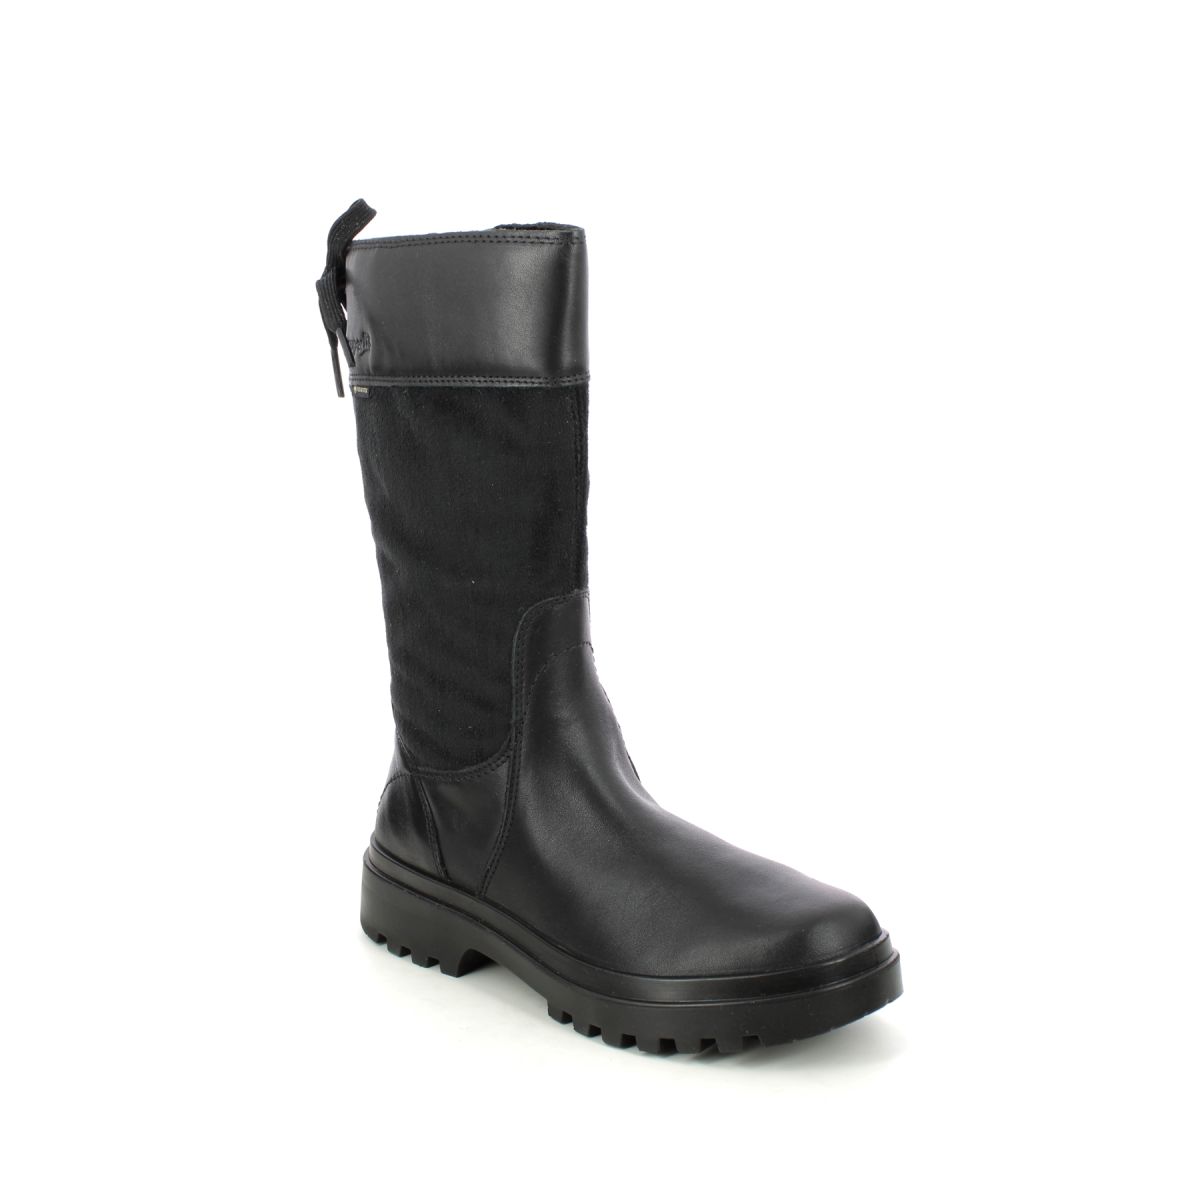 Superfit Abby Long Gtx Black Leather Kids Girls Boots 1000605-0000 In Size 34 In Plain Black Leather For kids